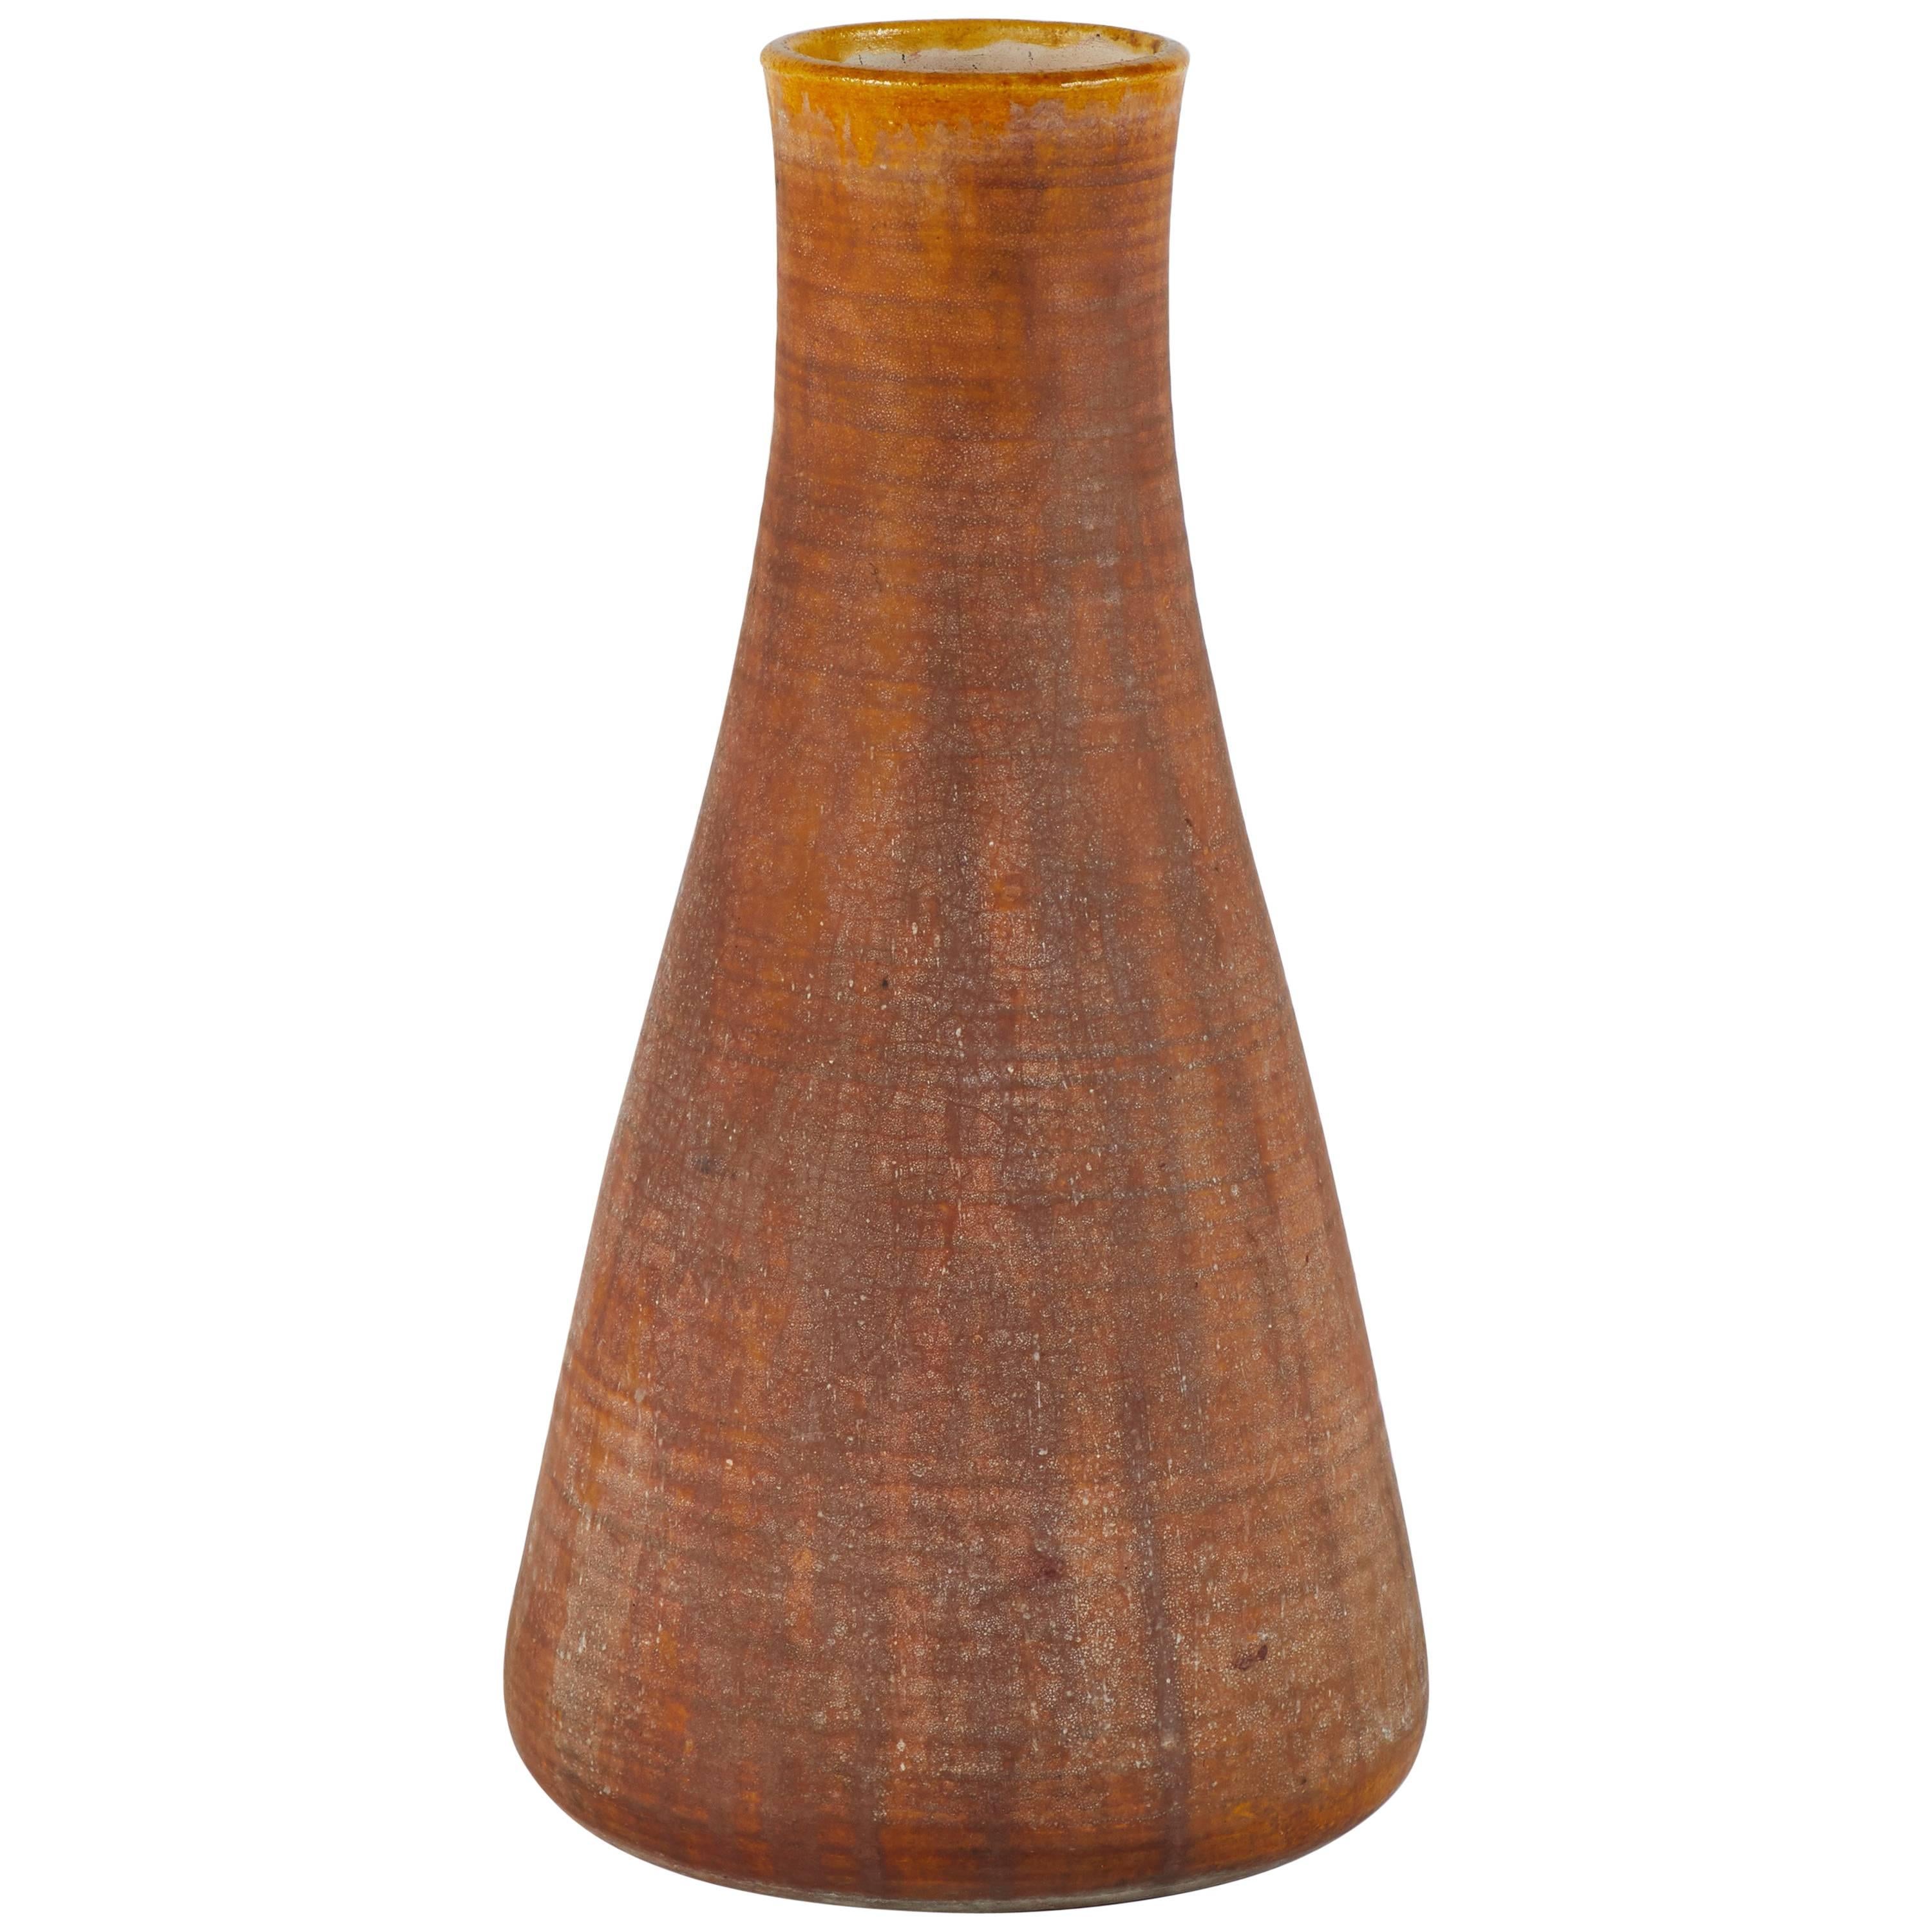 1930s Pottery Vase with Natural Orange Exterior and Glazed Interior from France